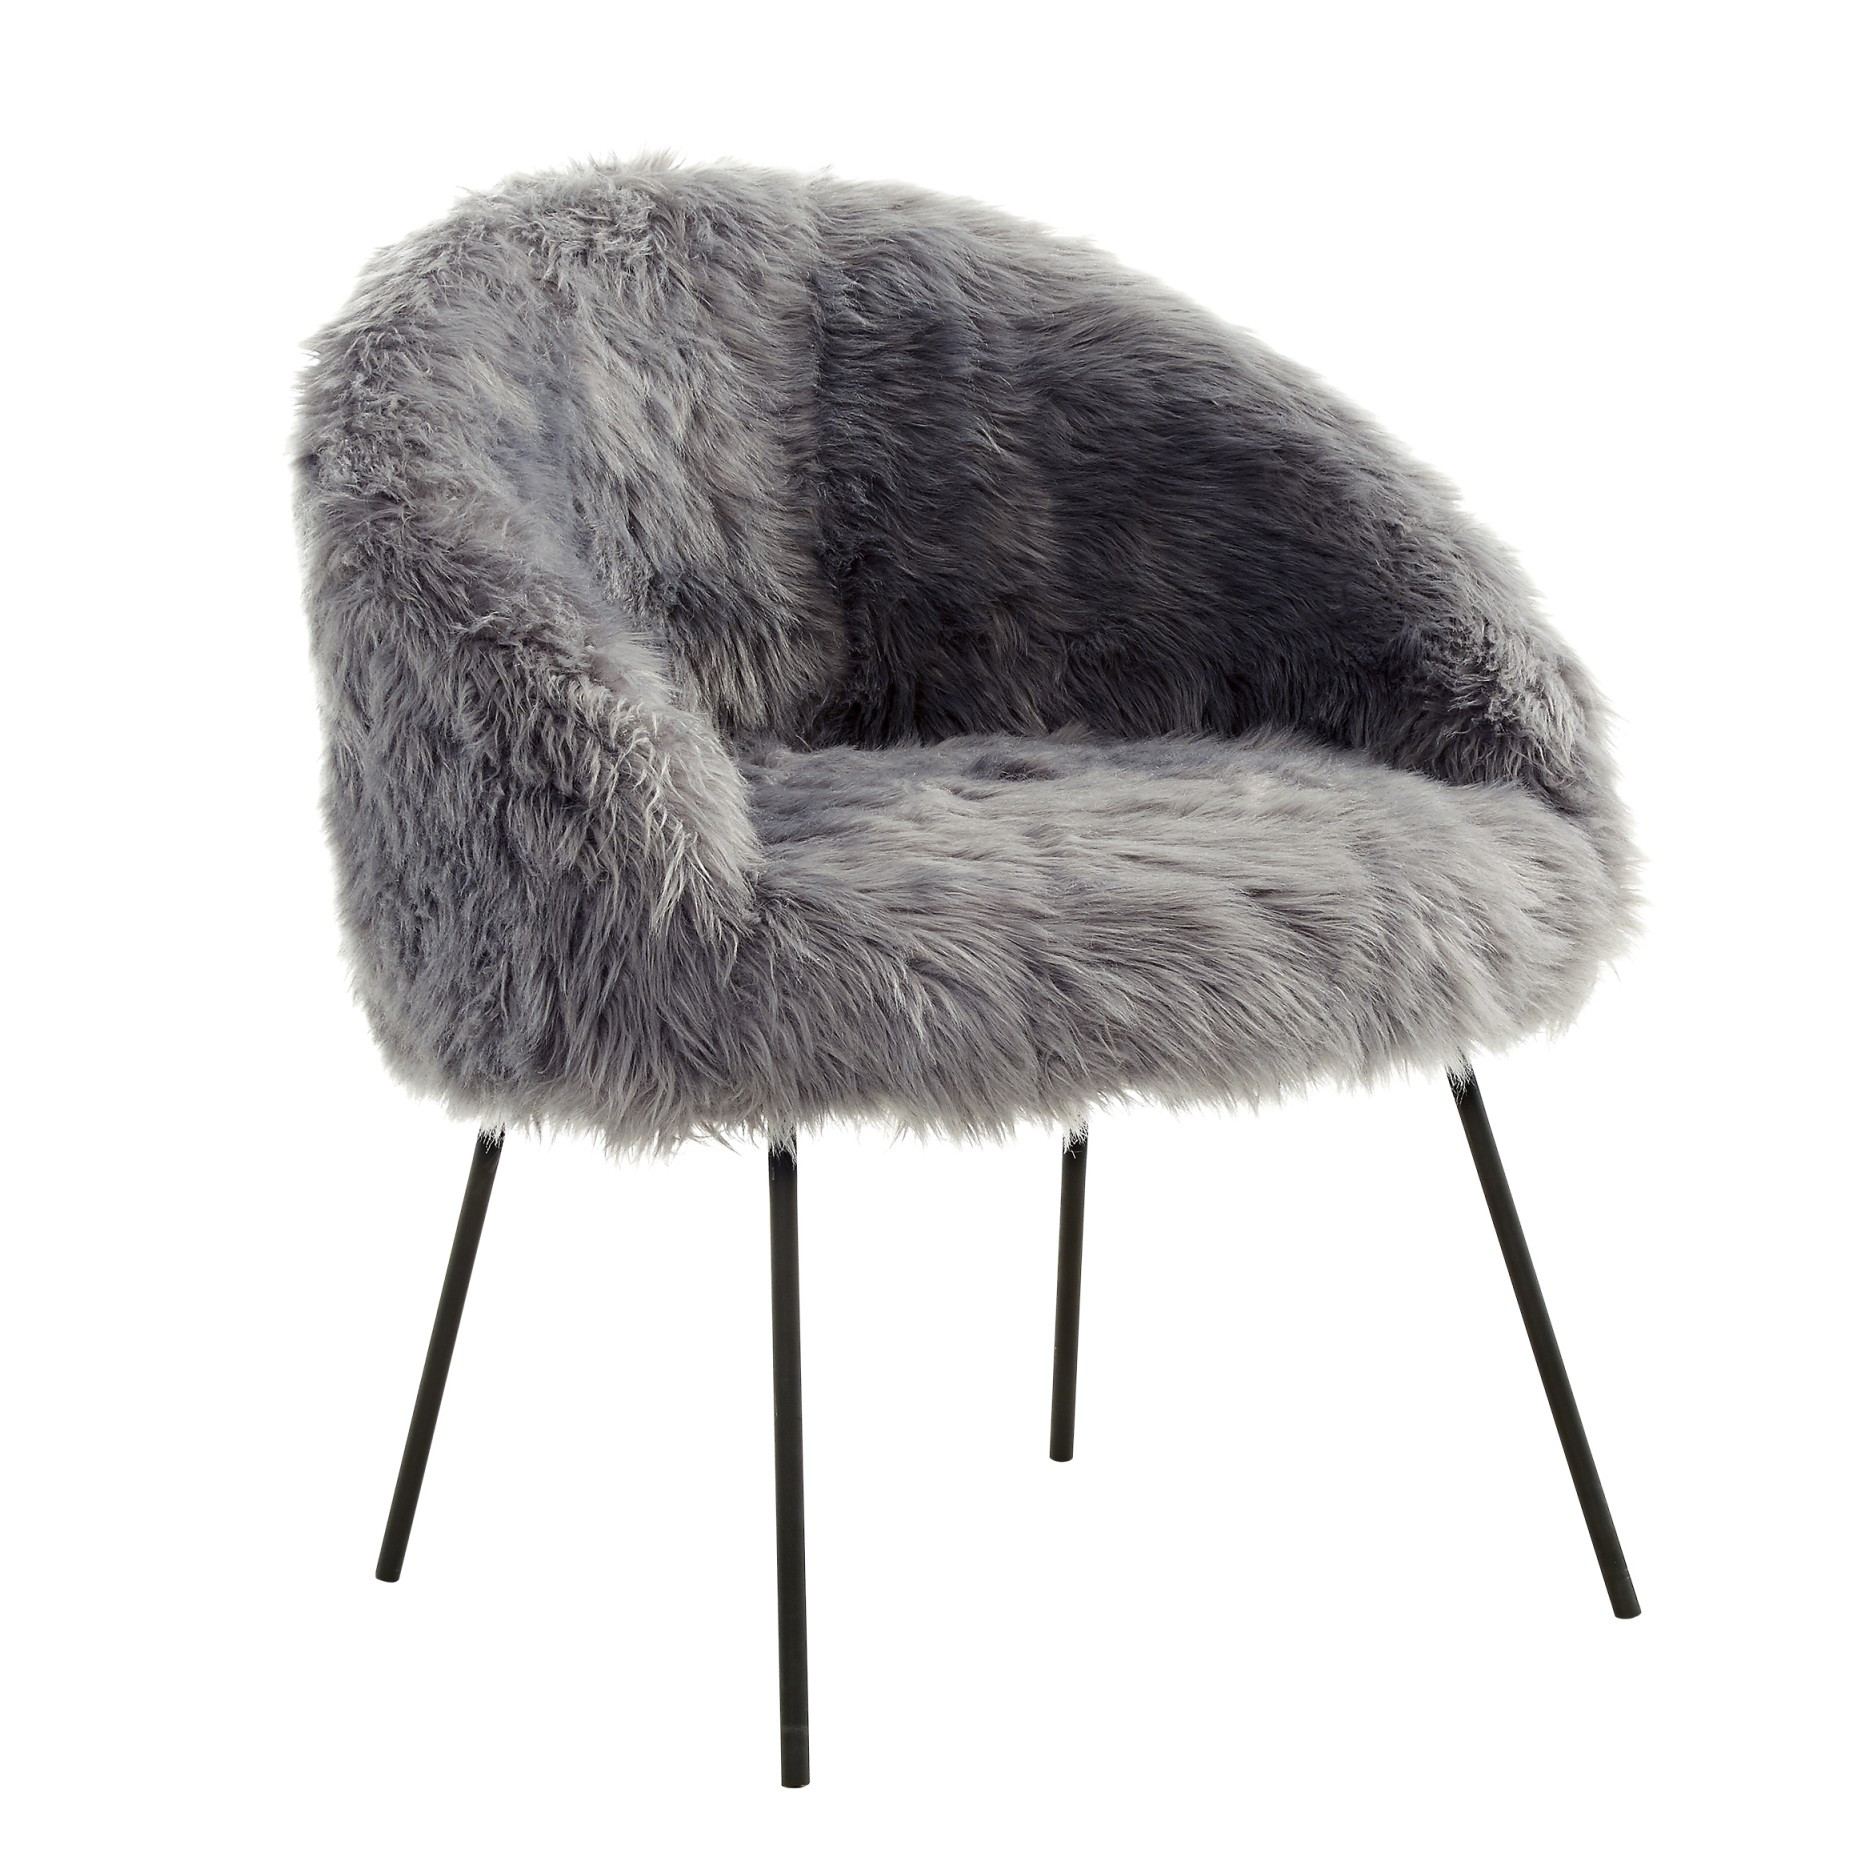 28" Gray And Black Faux Fur Arm Chair-533845-1